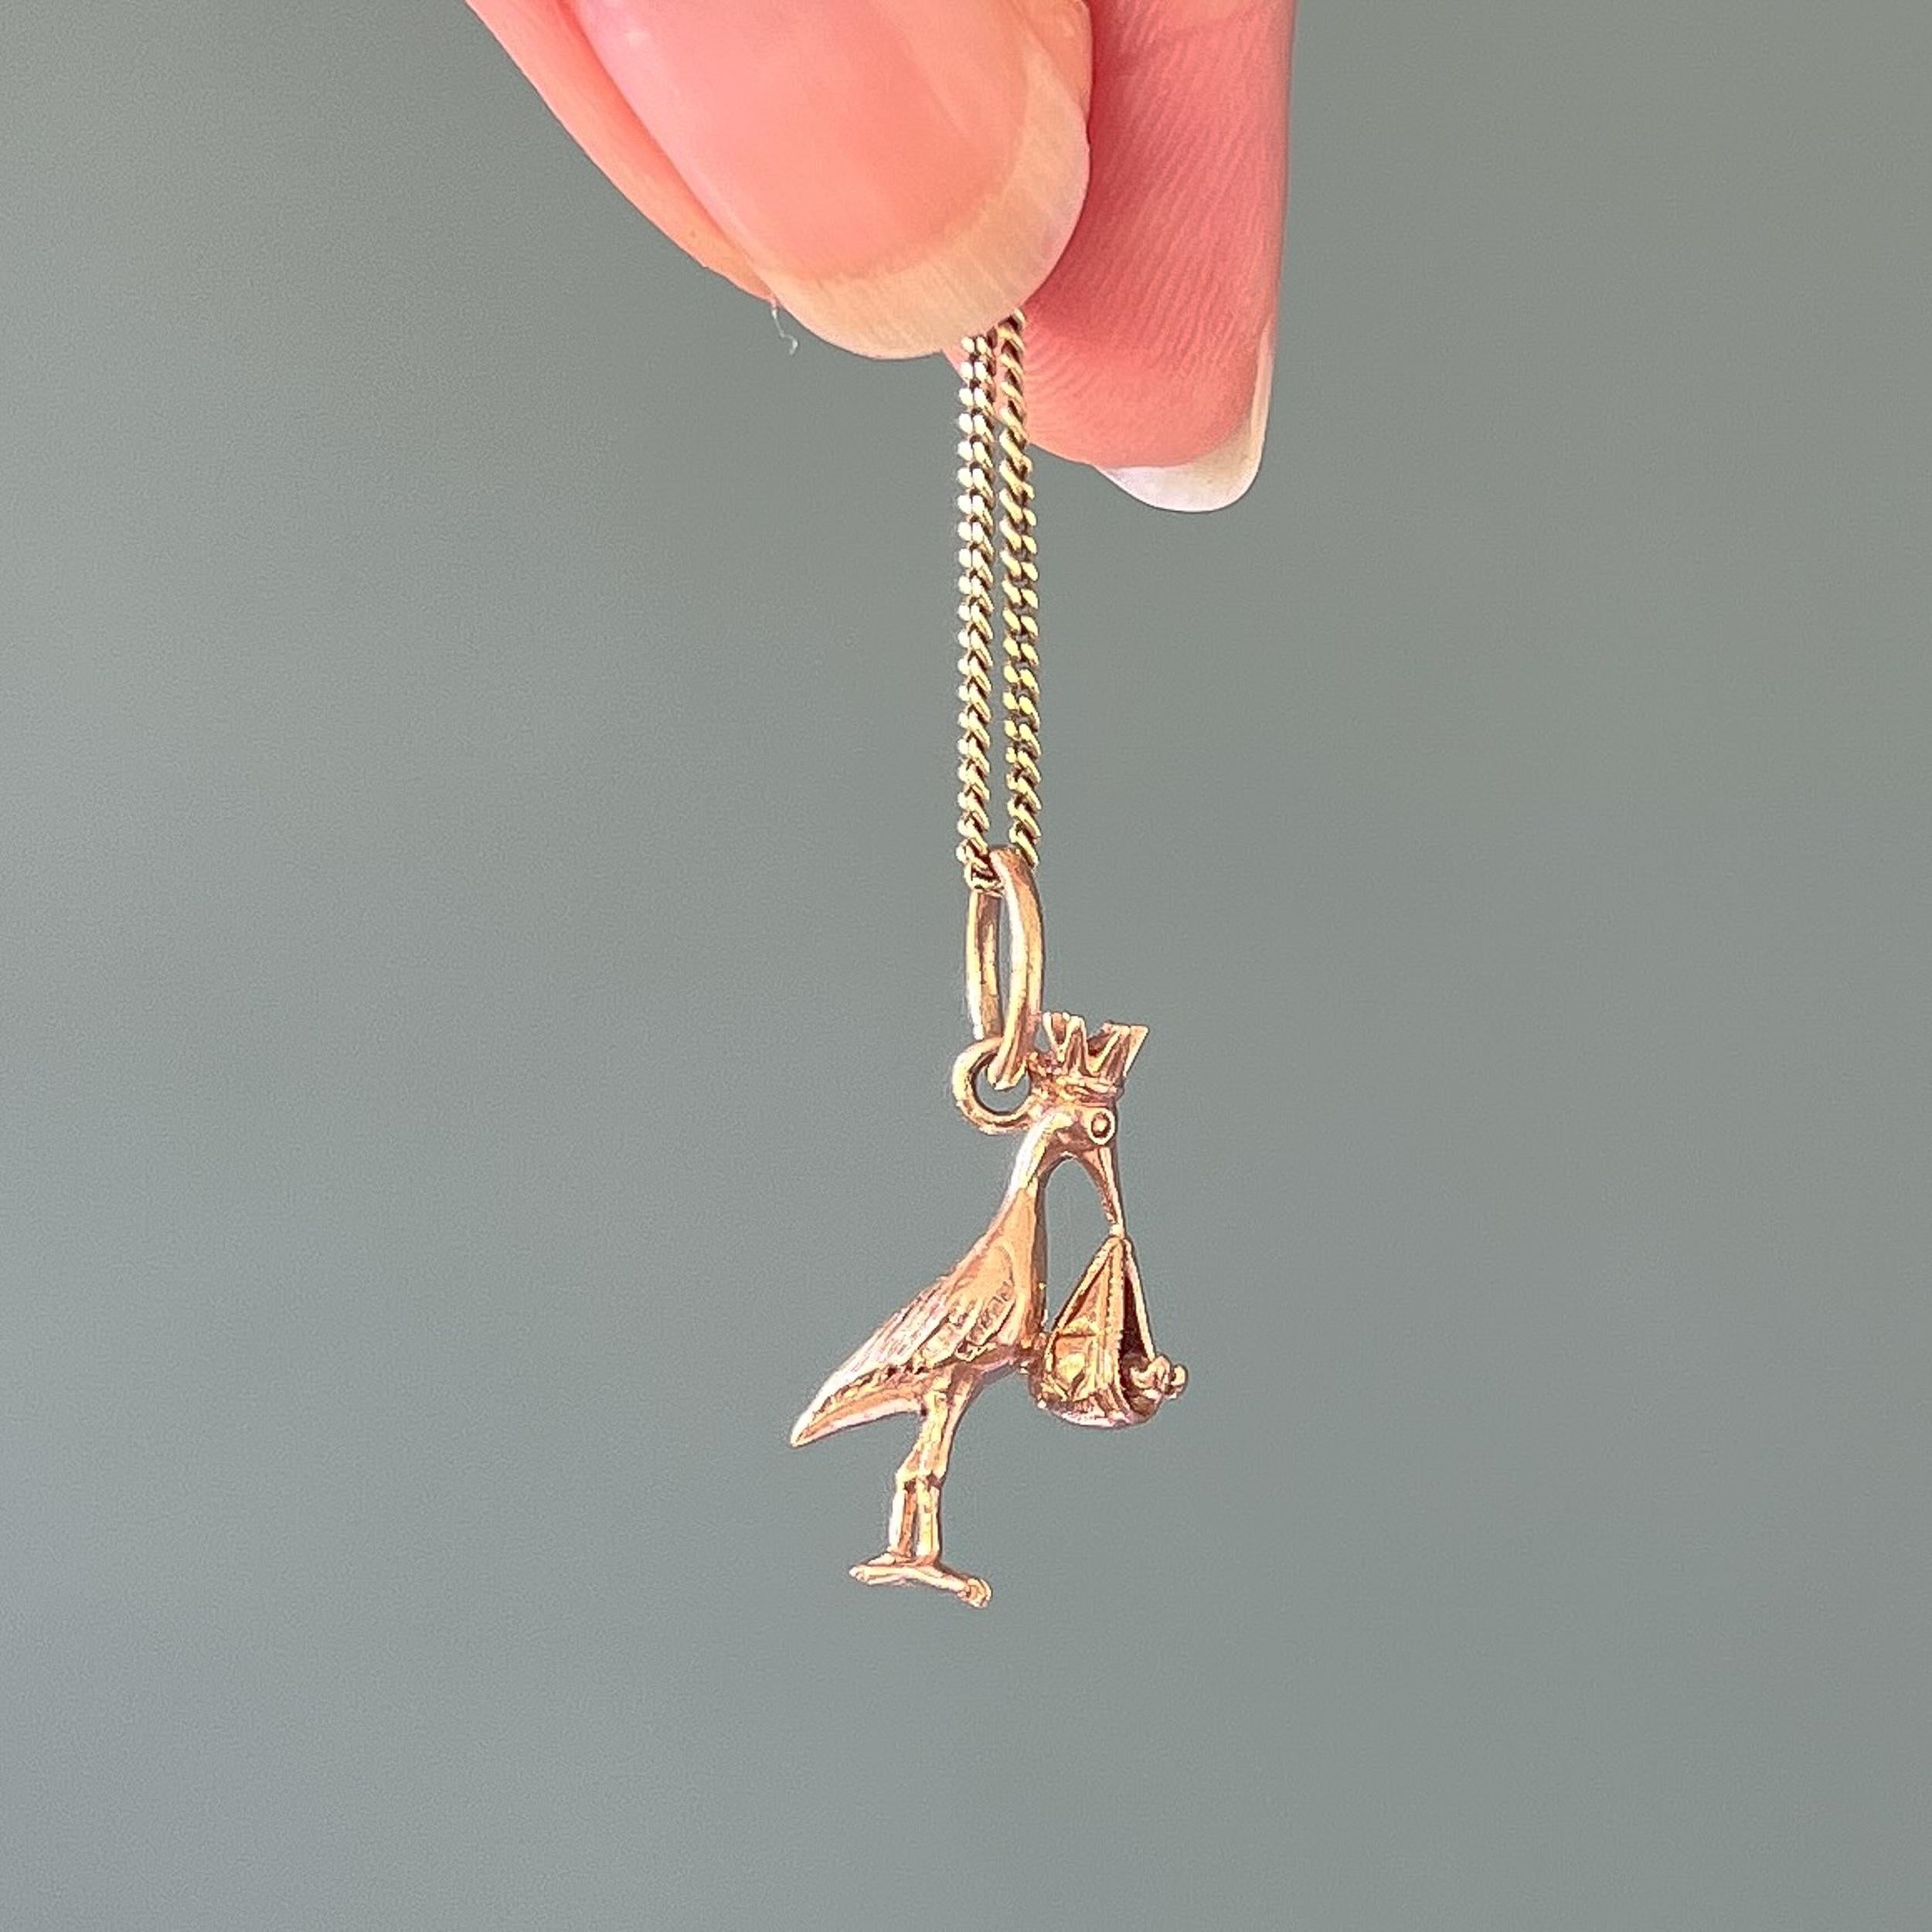 A vintage 9 karat rose gold stork with a baby charm pendant. The stork is carrying a baby in a cloth bundle dangling from its beak. The charm is beautifully crafted with its fine details from crown to her feet.

Storks are one of the most recognized